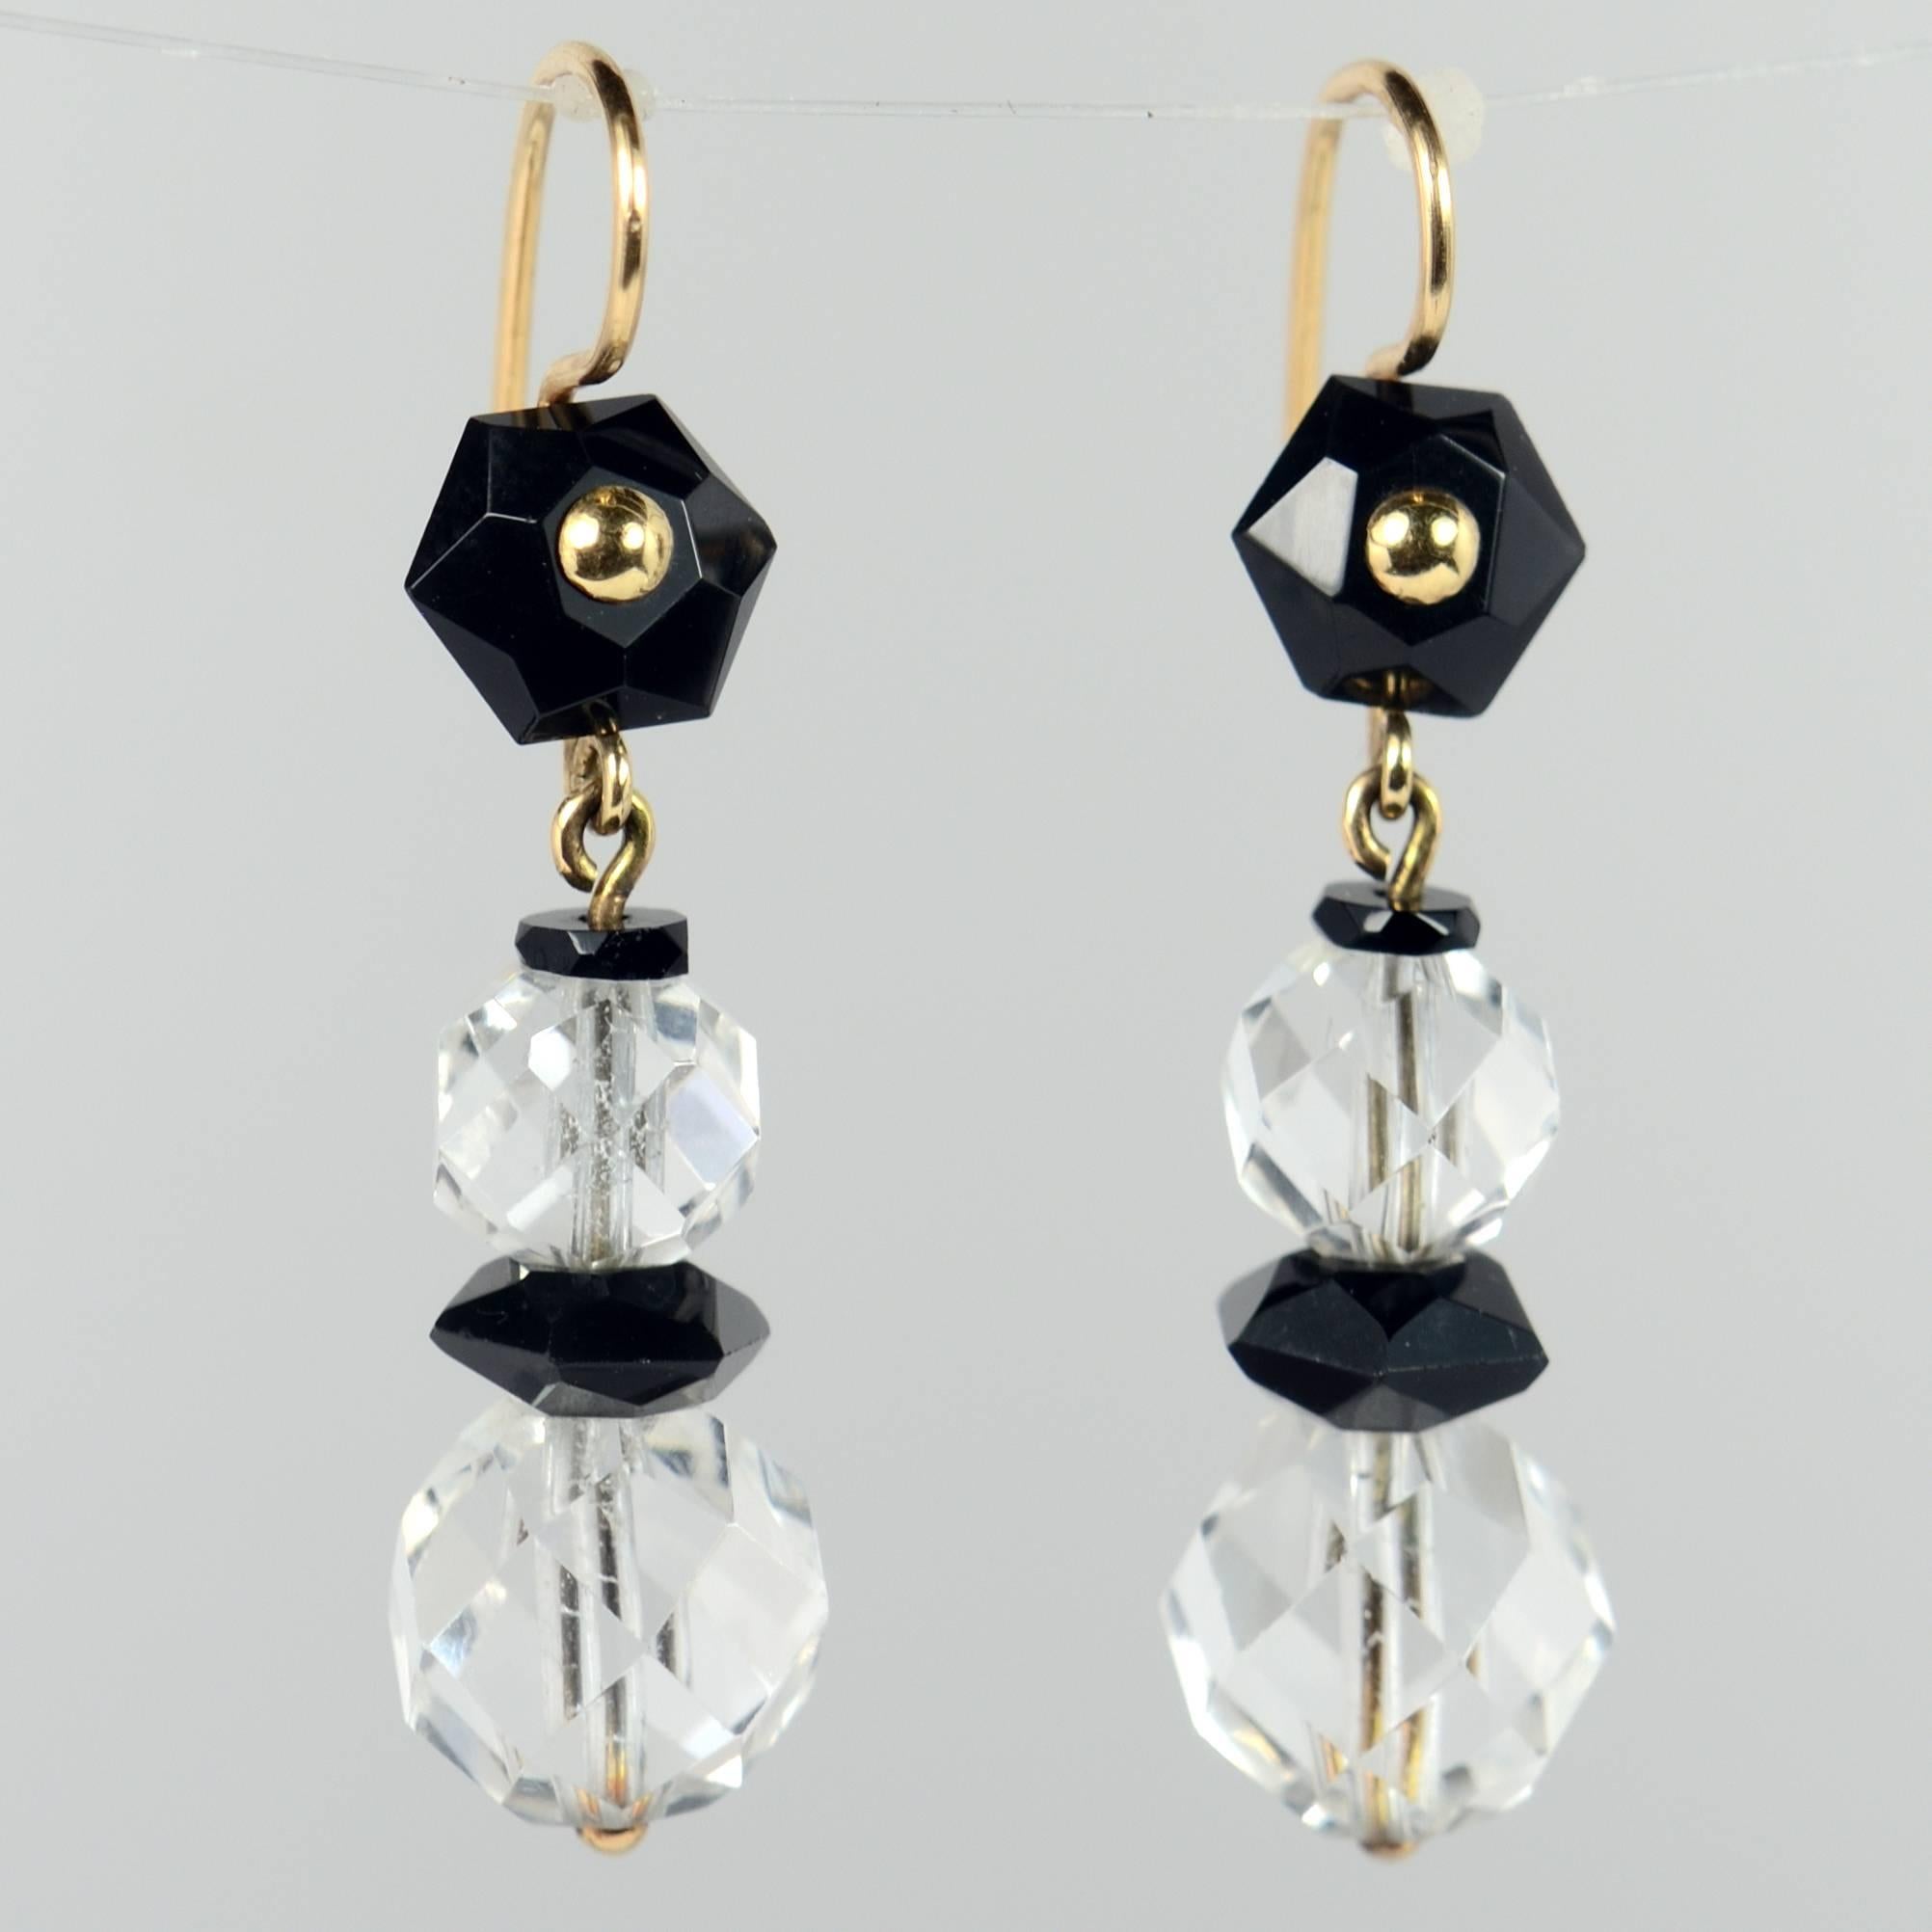 A stylish pair of earrings from the Art Deco period with faceted beads of rock crystal and black onyx suspended from 14 carat yellow gold wires. Very easy and elegant to wear.

The earrings are 4.2cm in length and are 1.1cm wide, and weigh 6.62g in